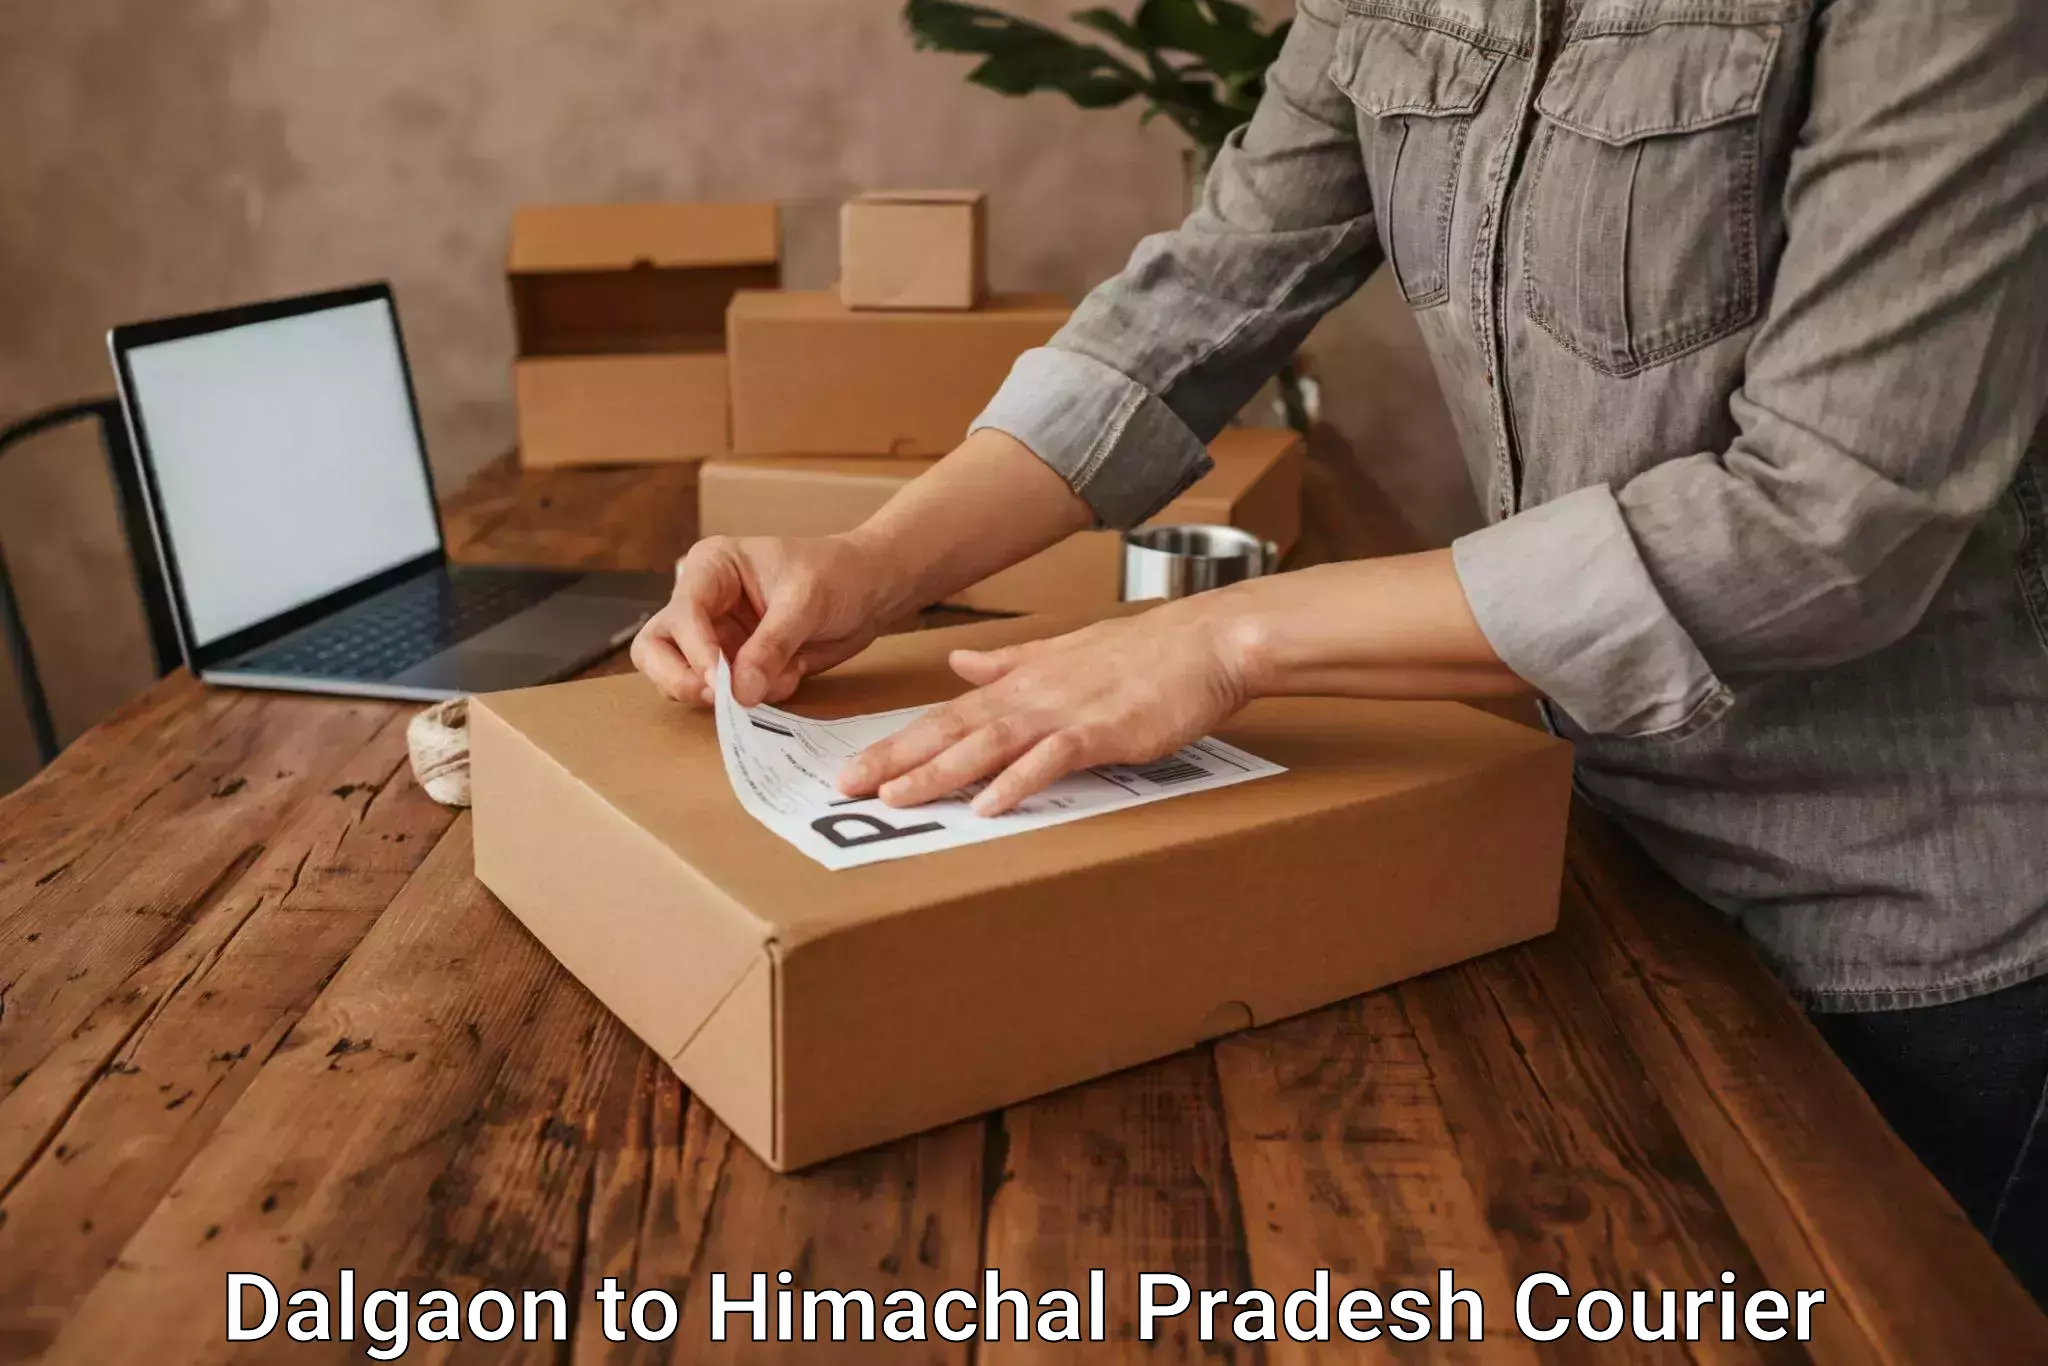 Advanced tracking systems in Dalgaon to Himachal Pradesh